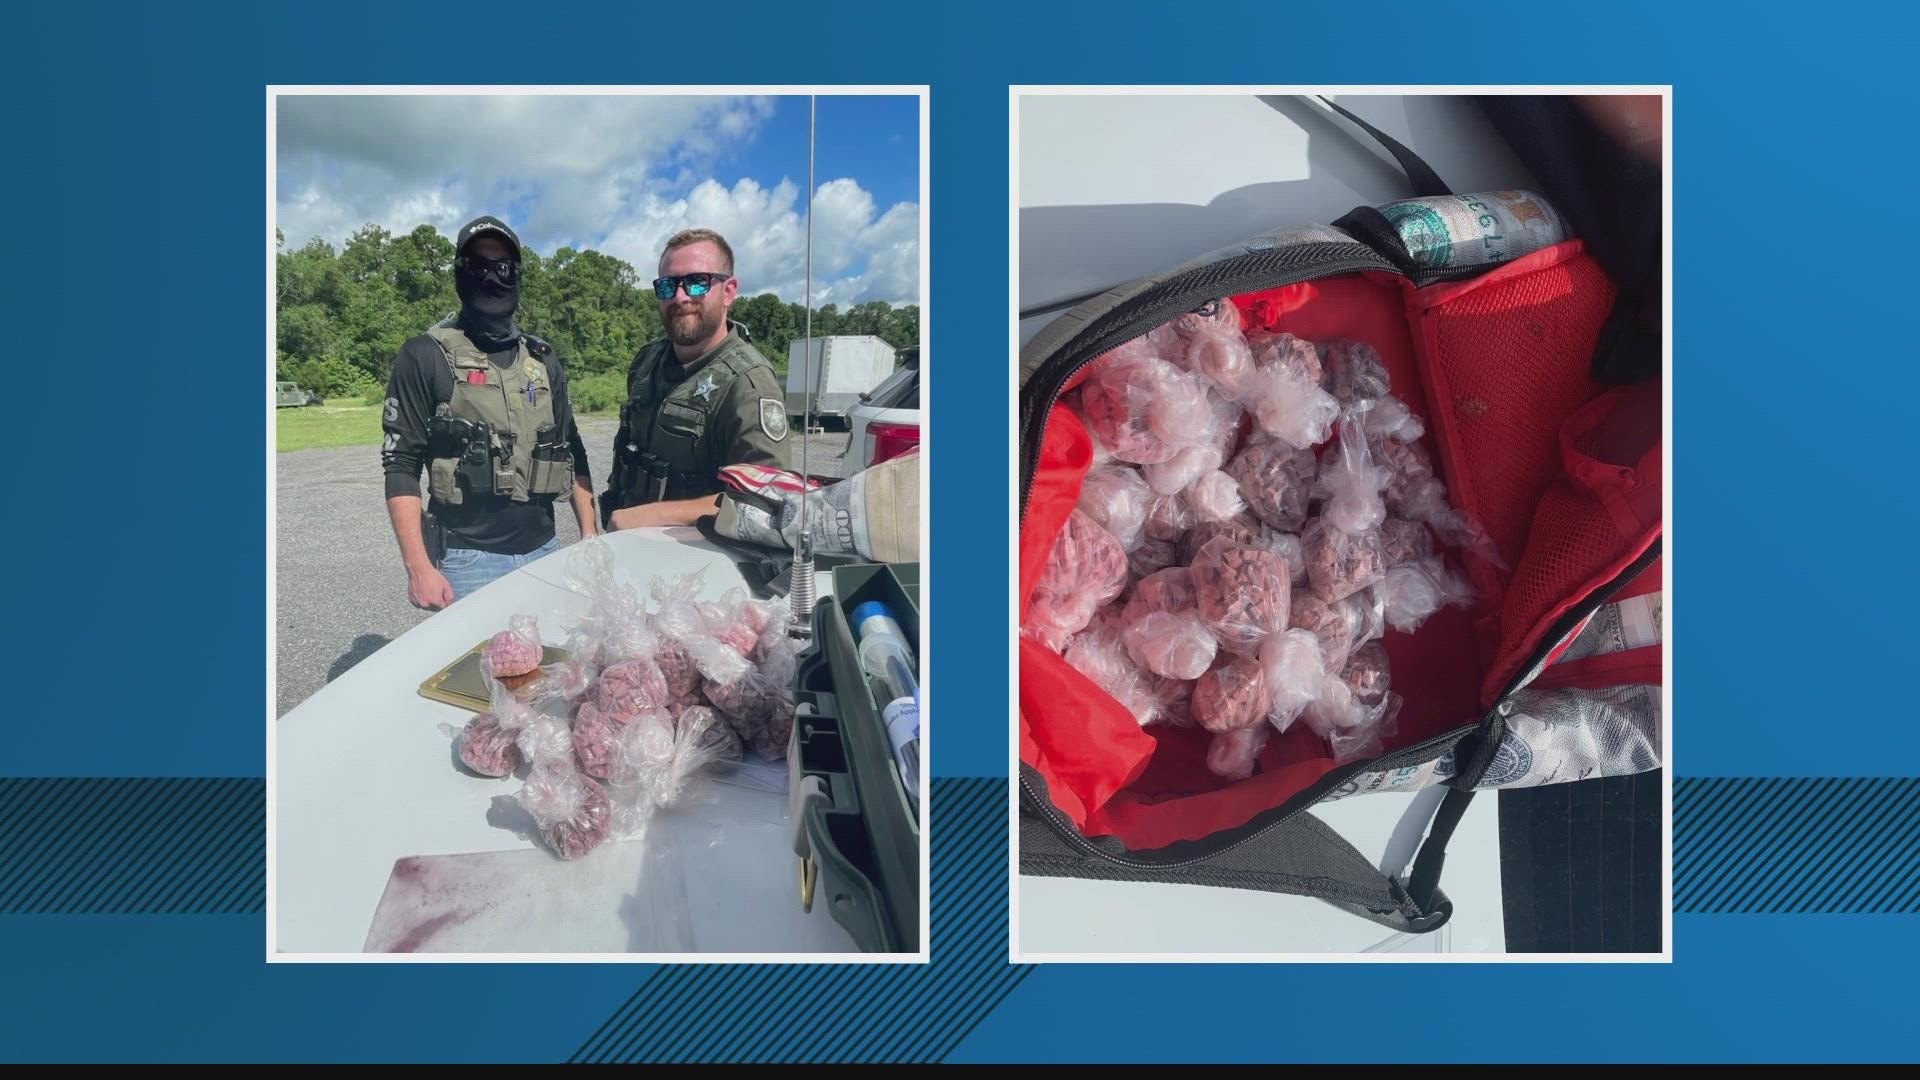 During an inventory search of the vehicle, Putnam deputies say they located a backpack with 28 bags of pressed pills.